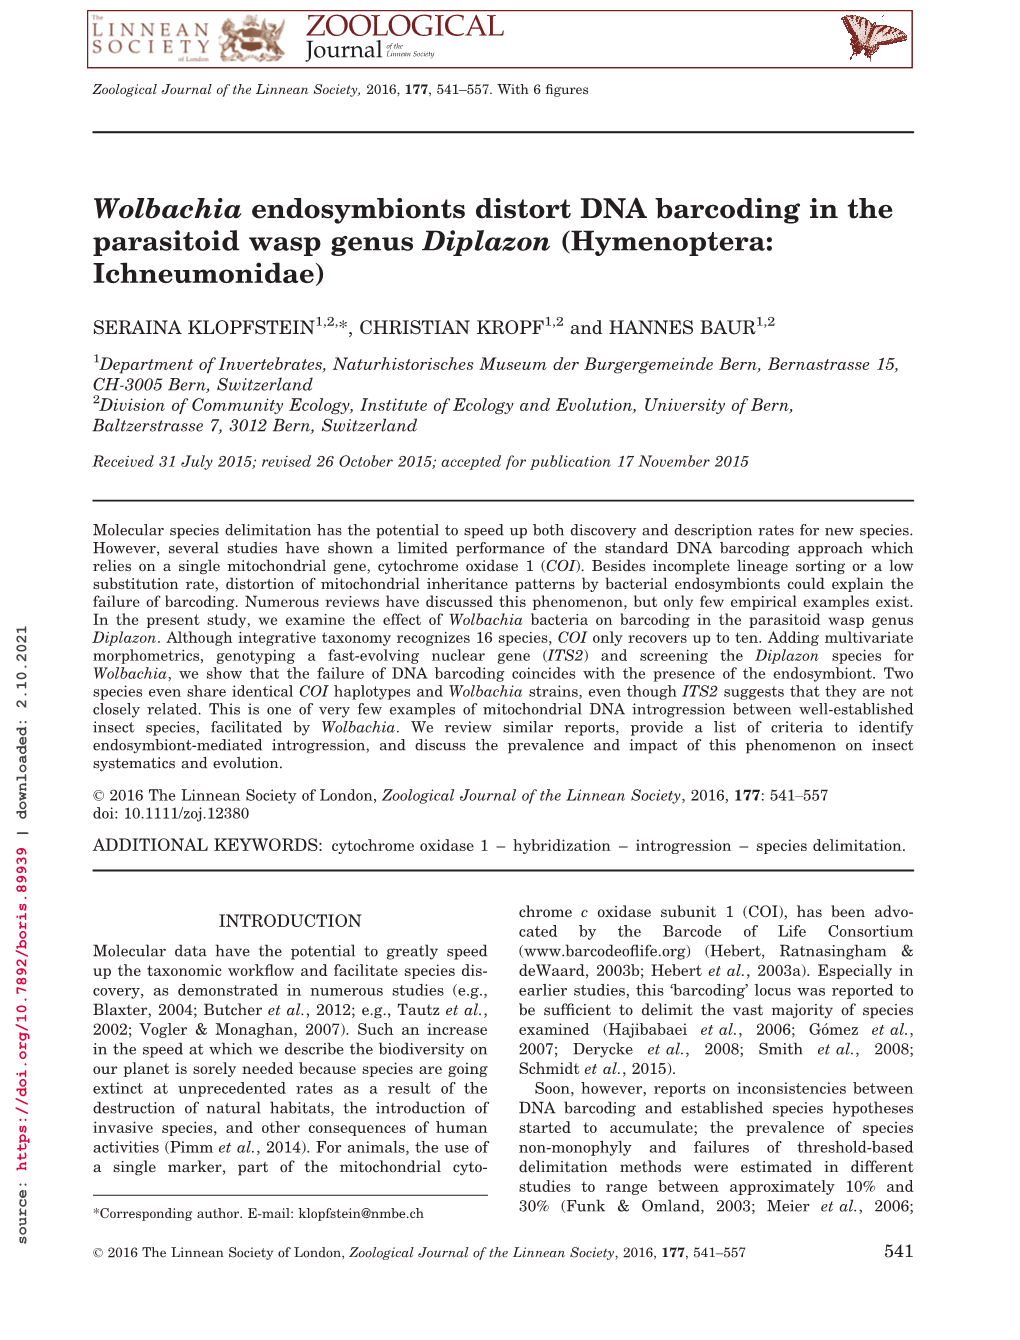 Wolbachia Endosymbionts Distort DNA Barcoding in The